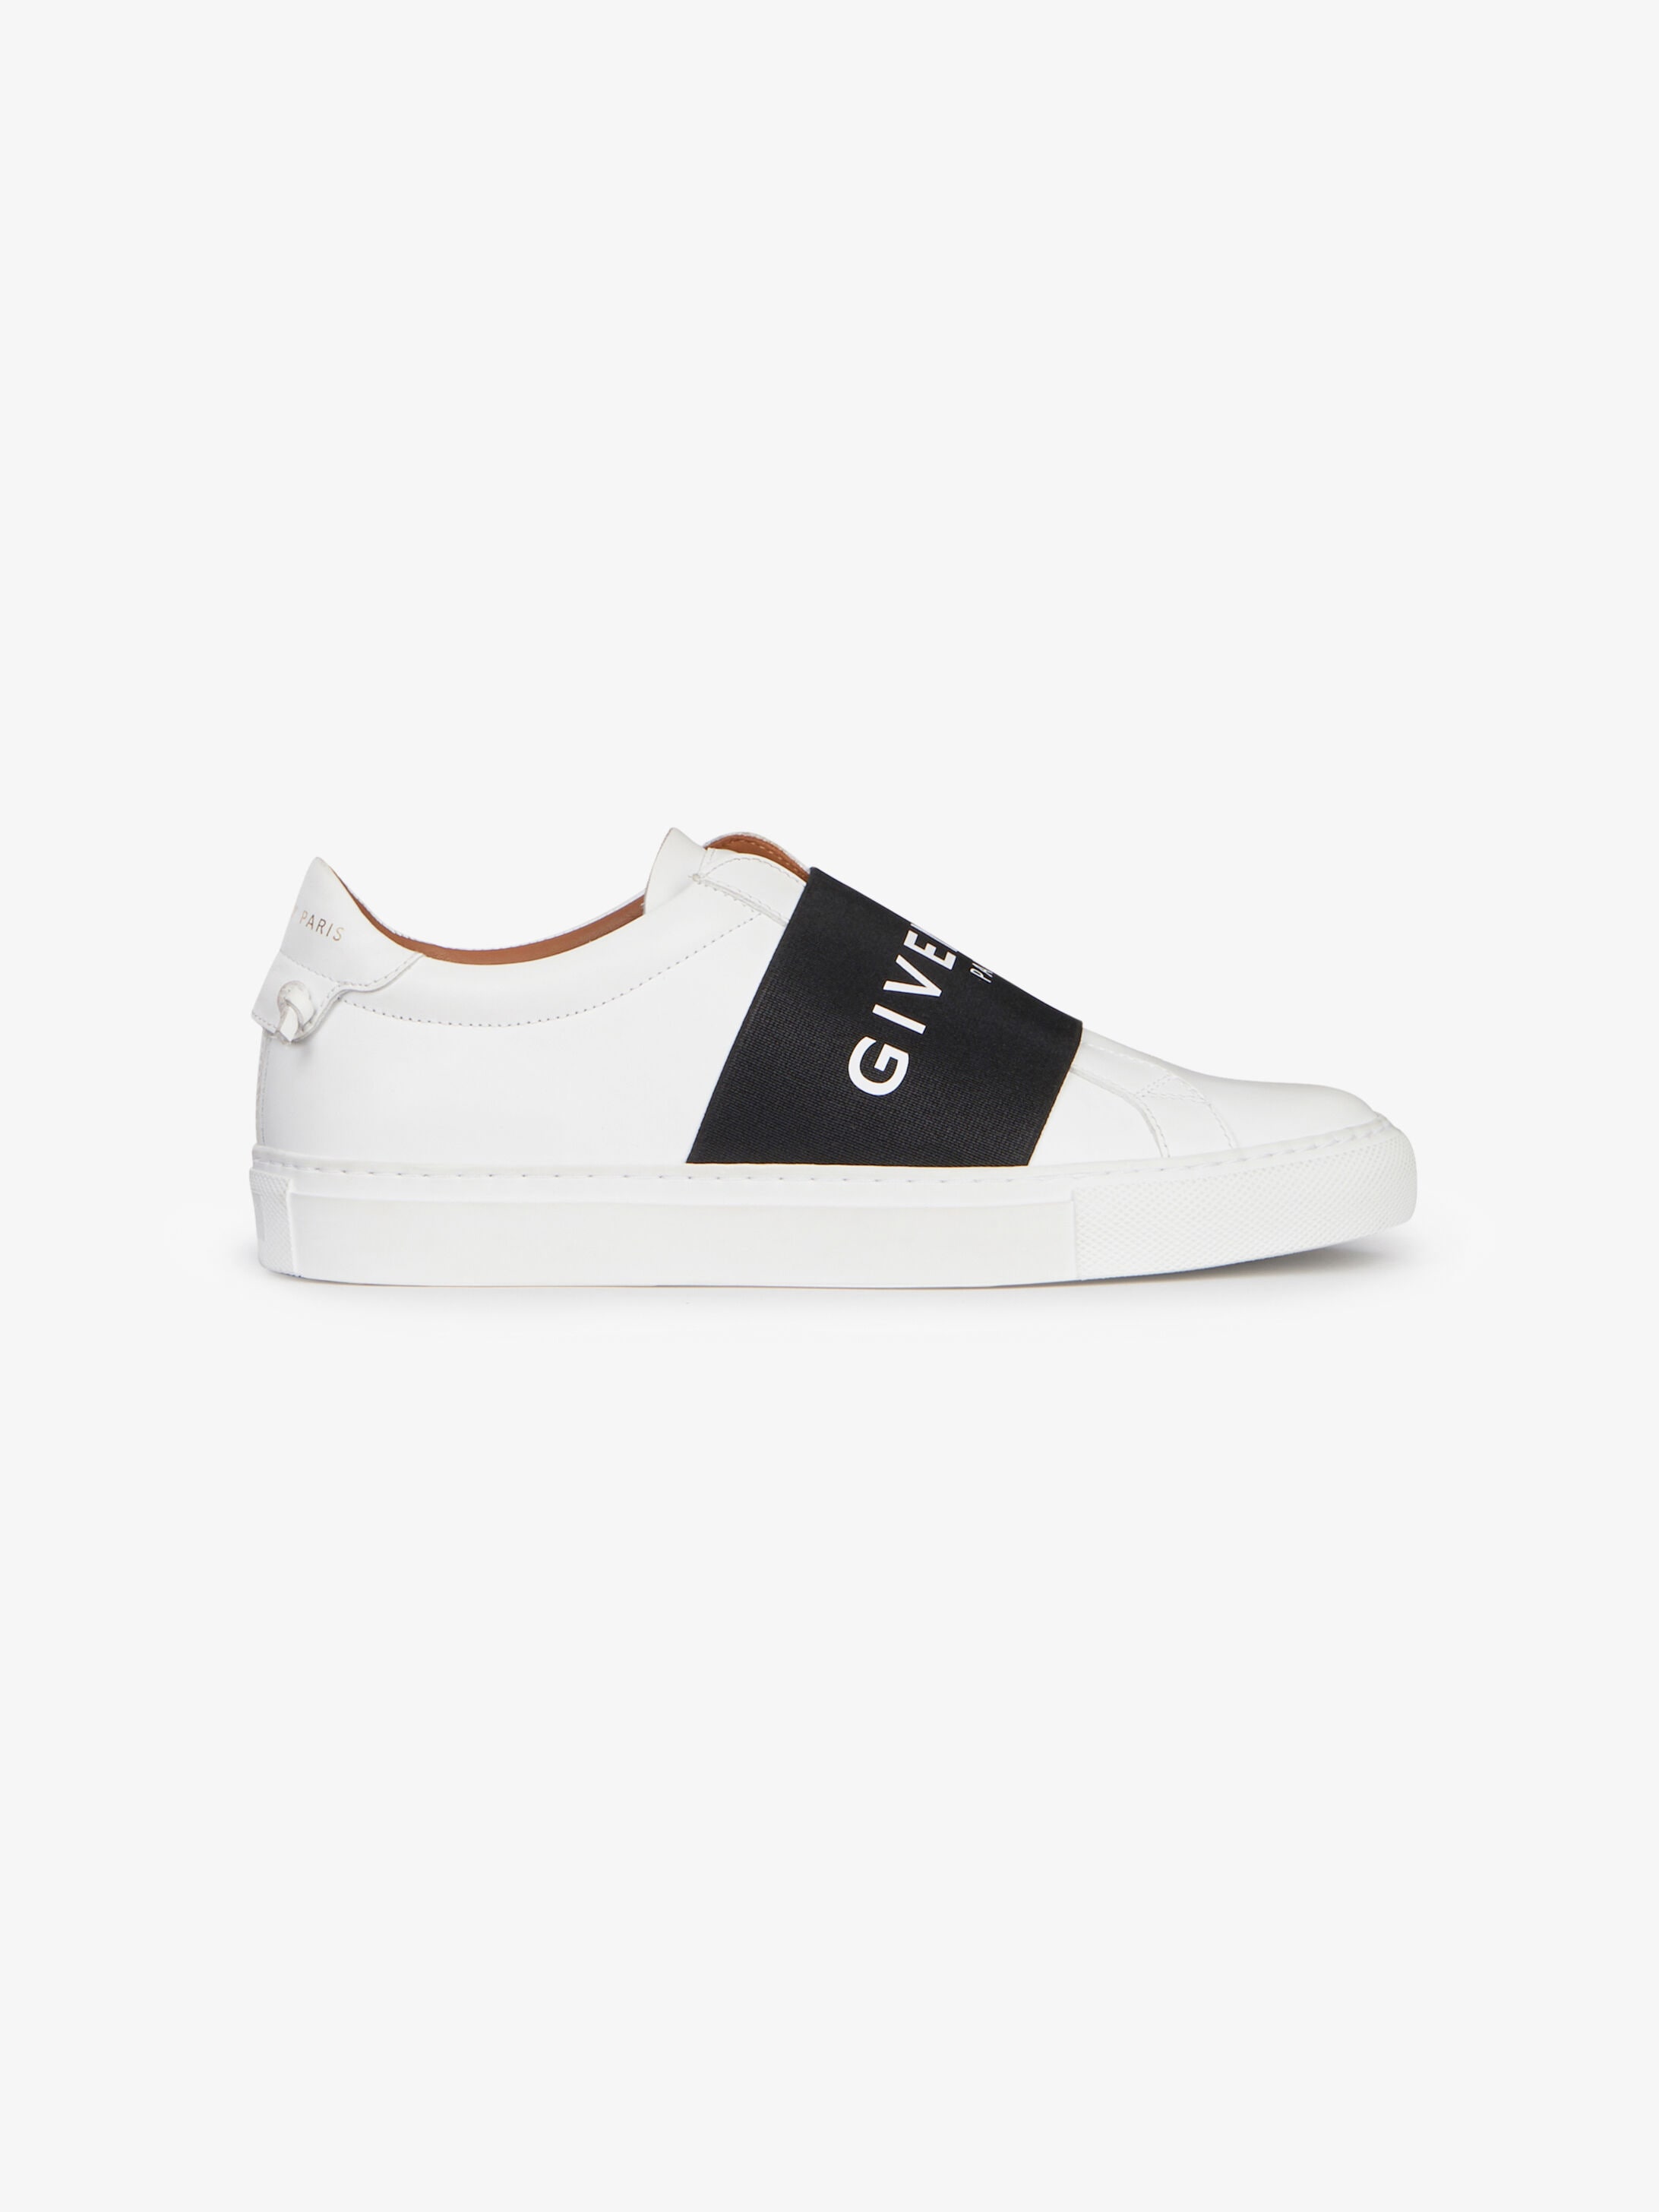 givenchy shoes white